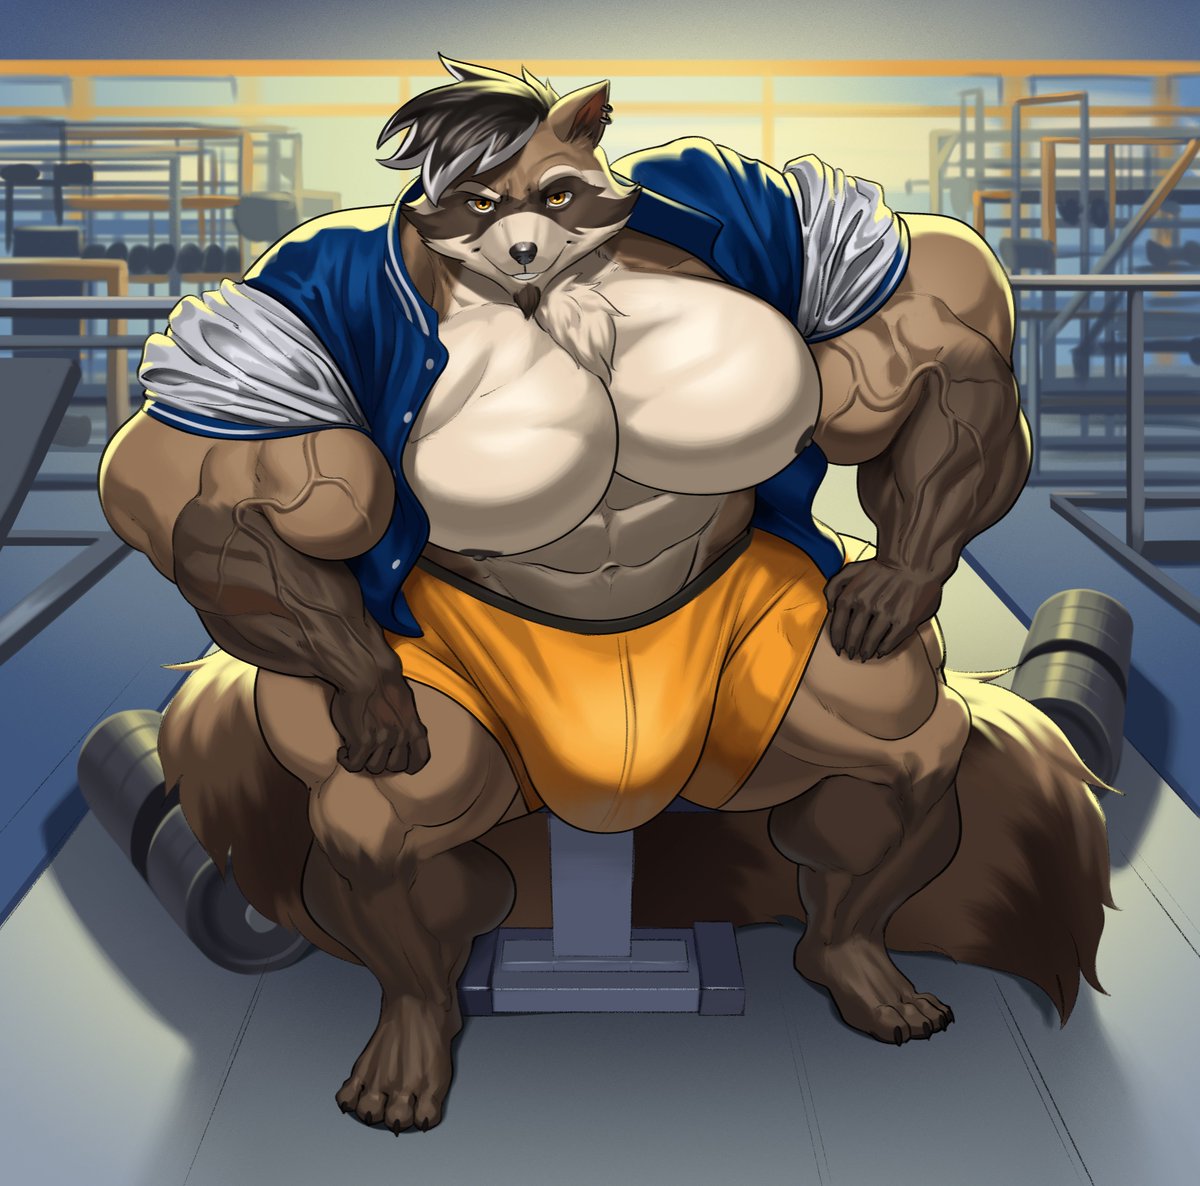 You've just walked in for your usual routine, but you might have to make some changes to your plans, hope you don't mind~

Art by none other than @Guzreuef🎨